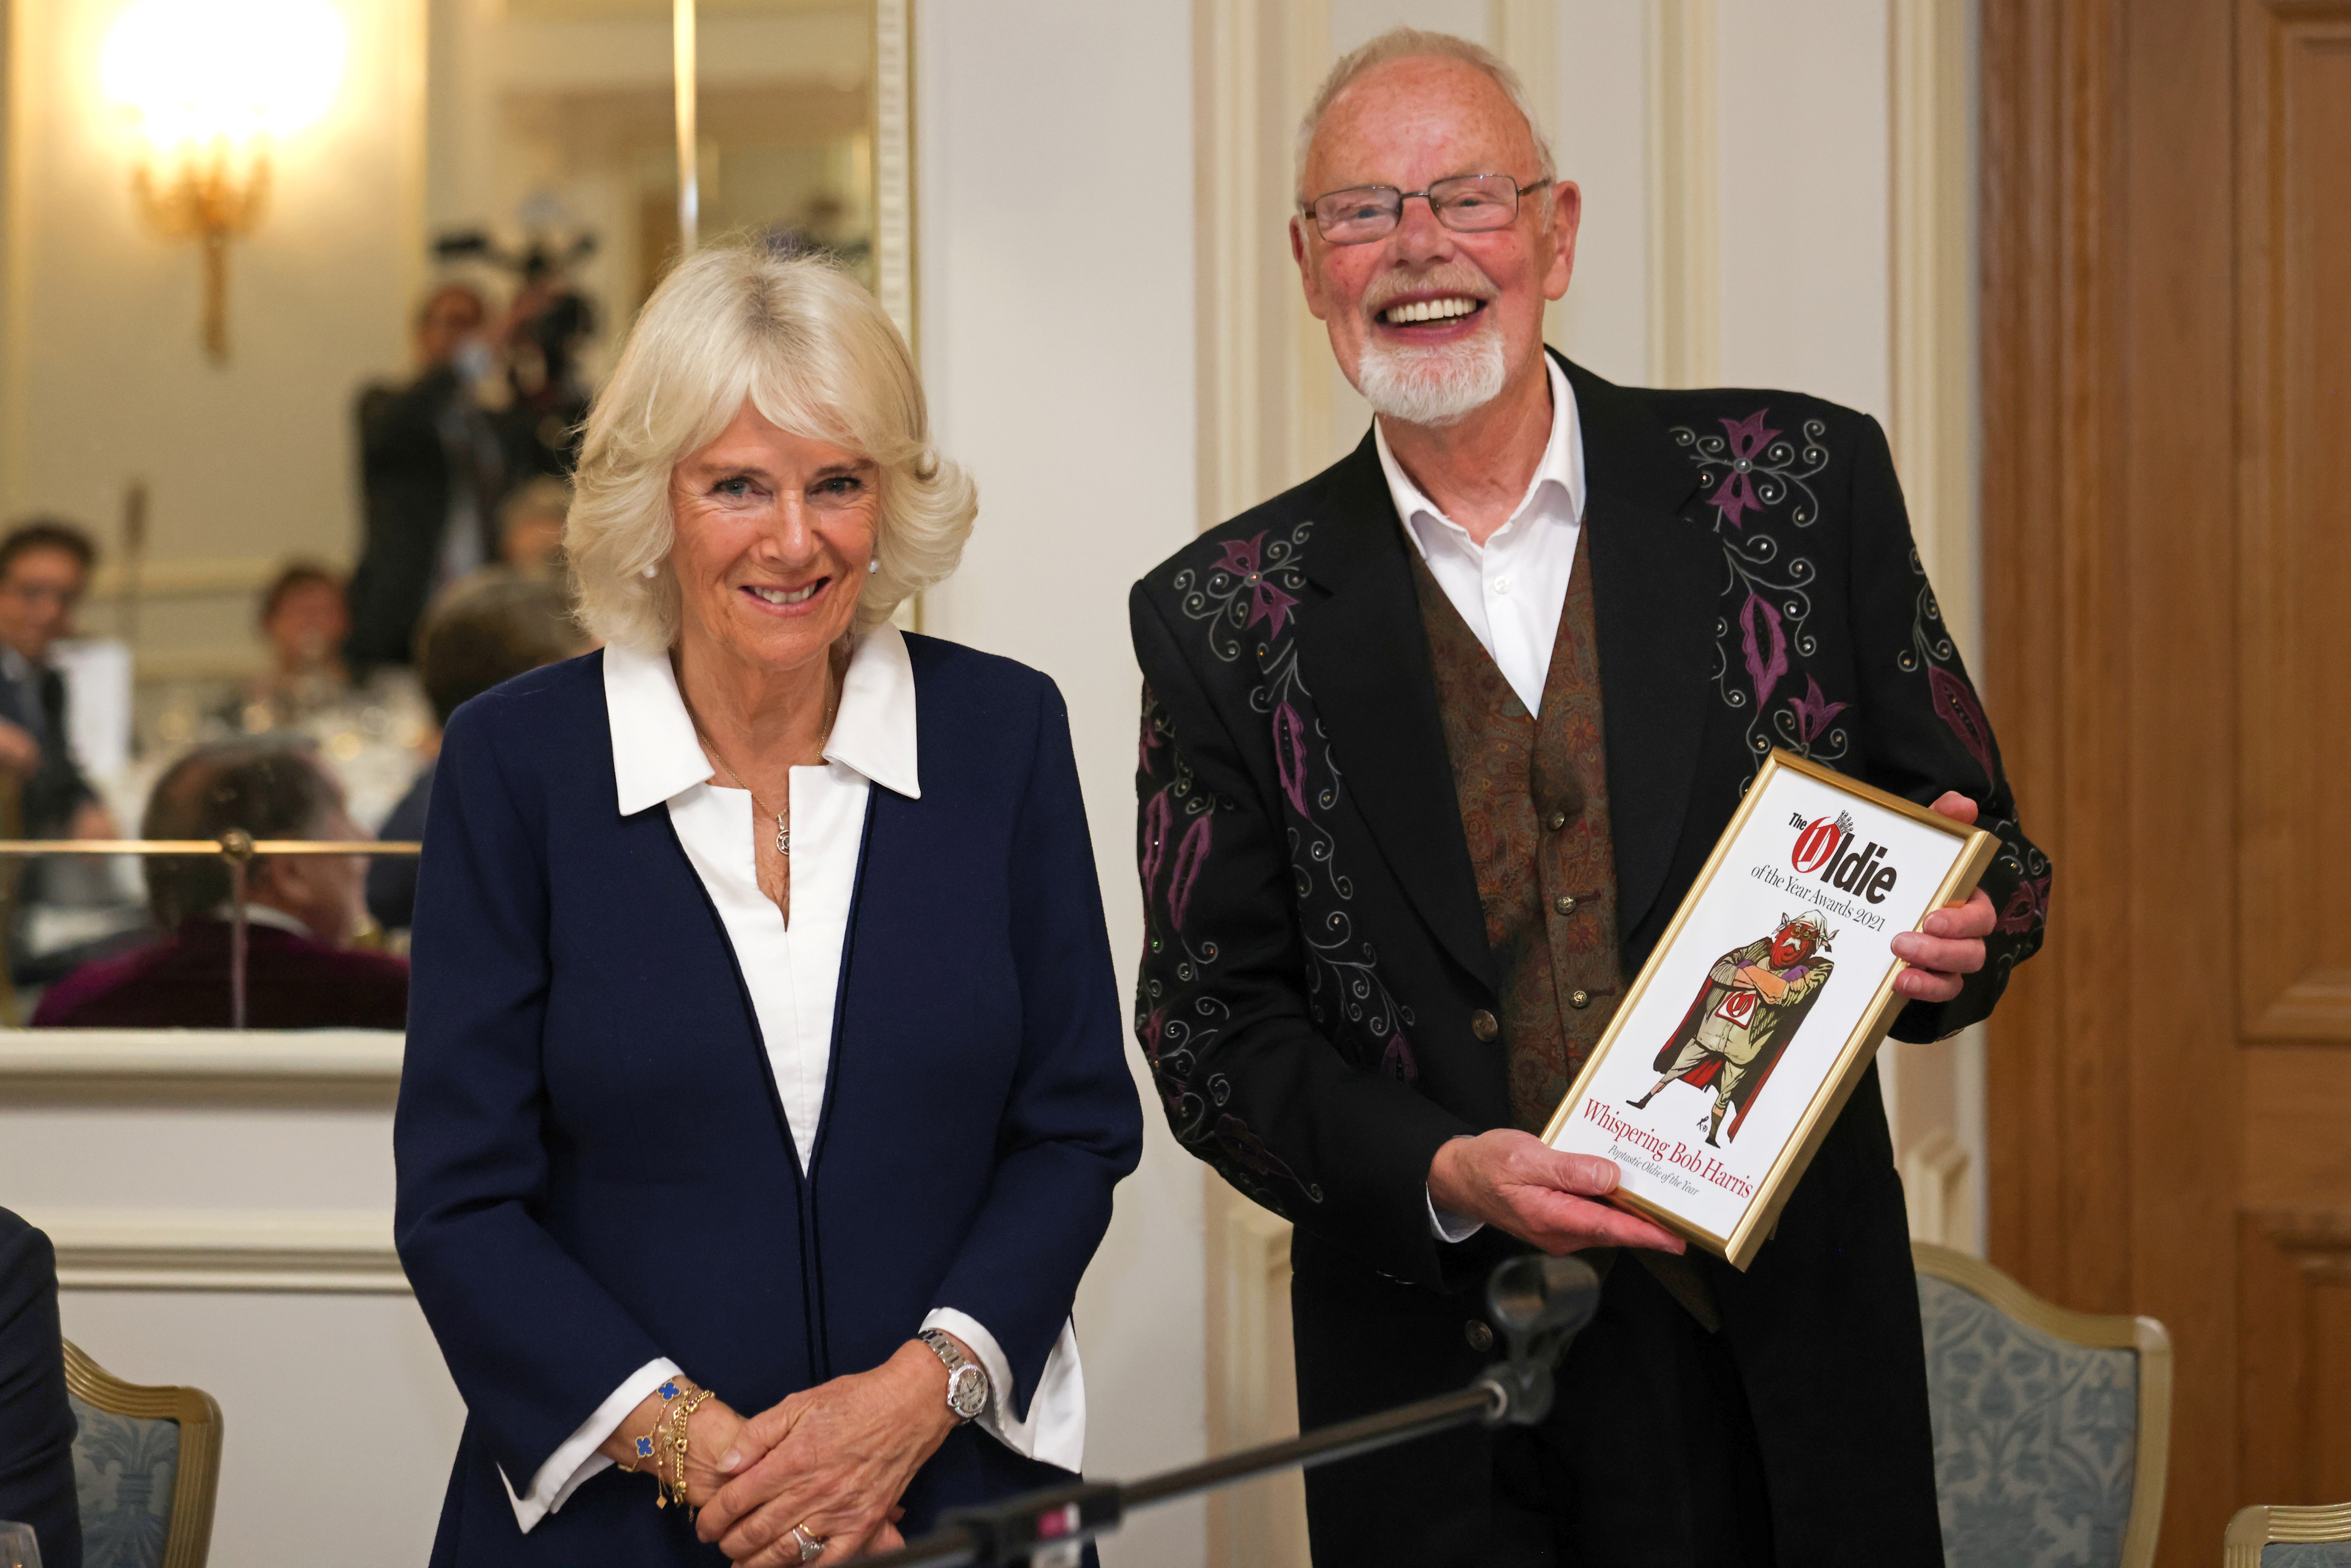 Britain's Camilla, Duchess of Cornwall, presents Whispering Bob Harris with the Poptastic Oldie of the Year award at the Oldie Of The Year Awards 2021 at The Savoy Hotel in London, Britain, October 19, 2021. Chris Jackson/Pool via REUTERS